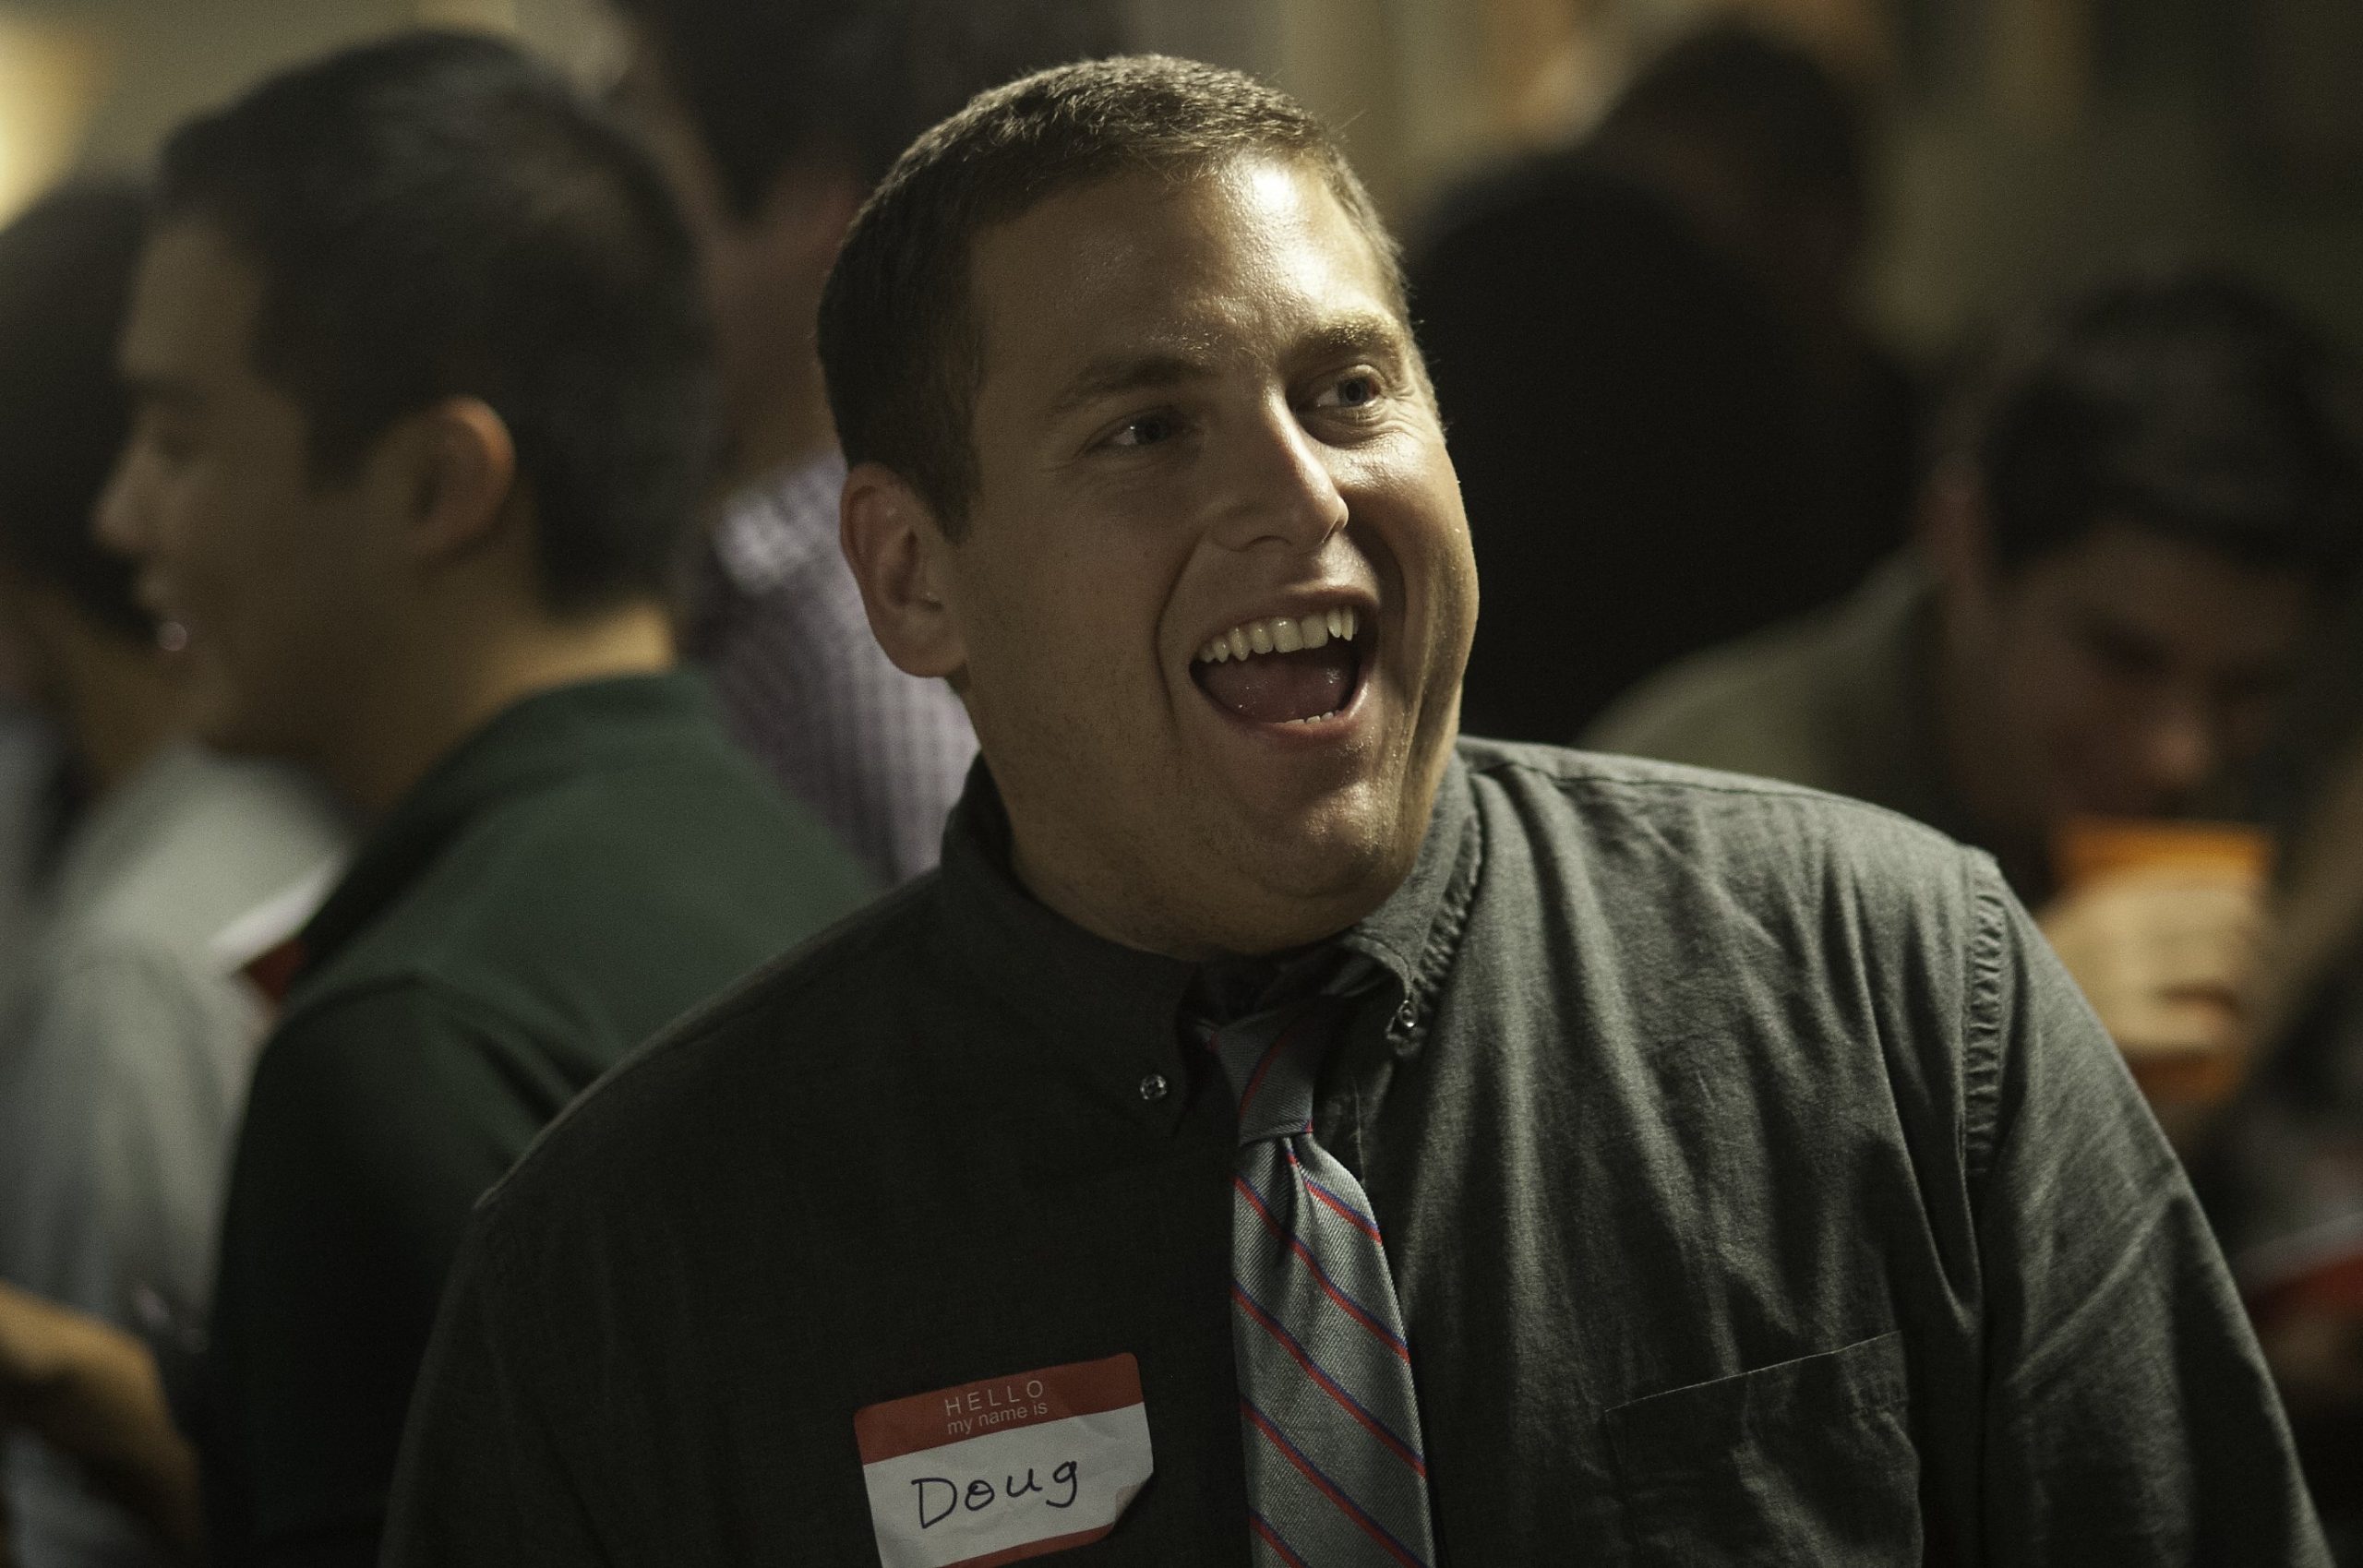 Jonah Hill stars in Columbia Pictures' "22 Jump Street," also starring Channing Tatum.